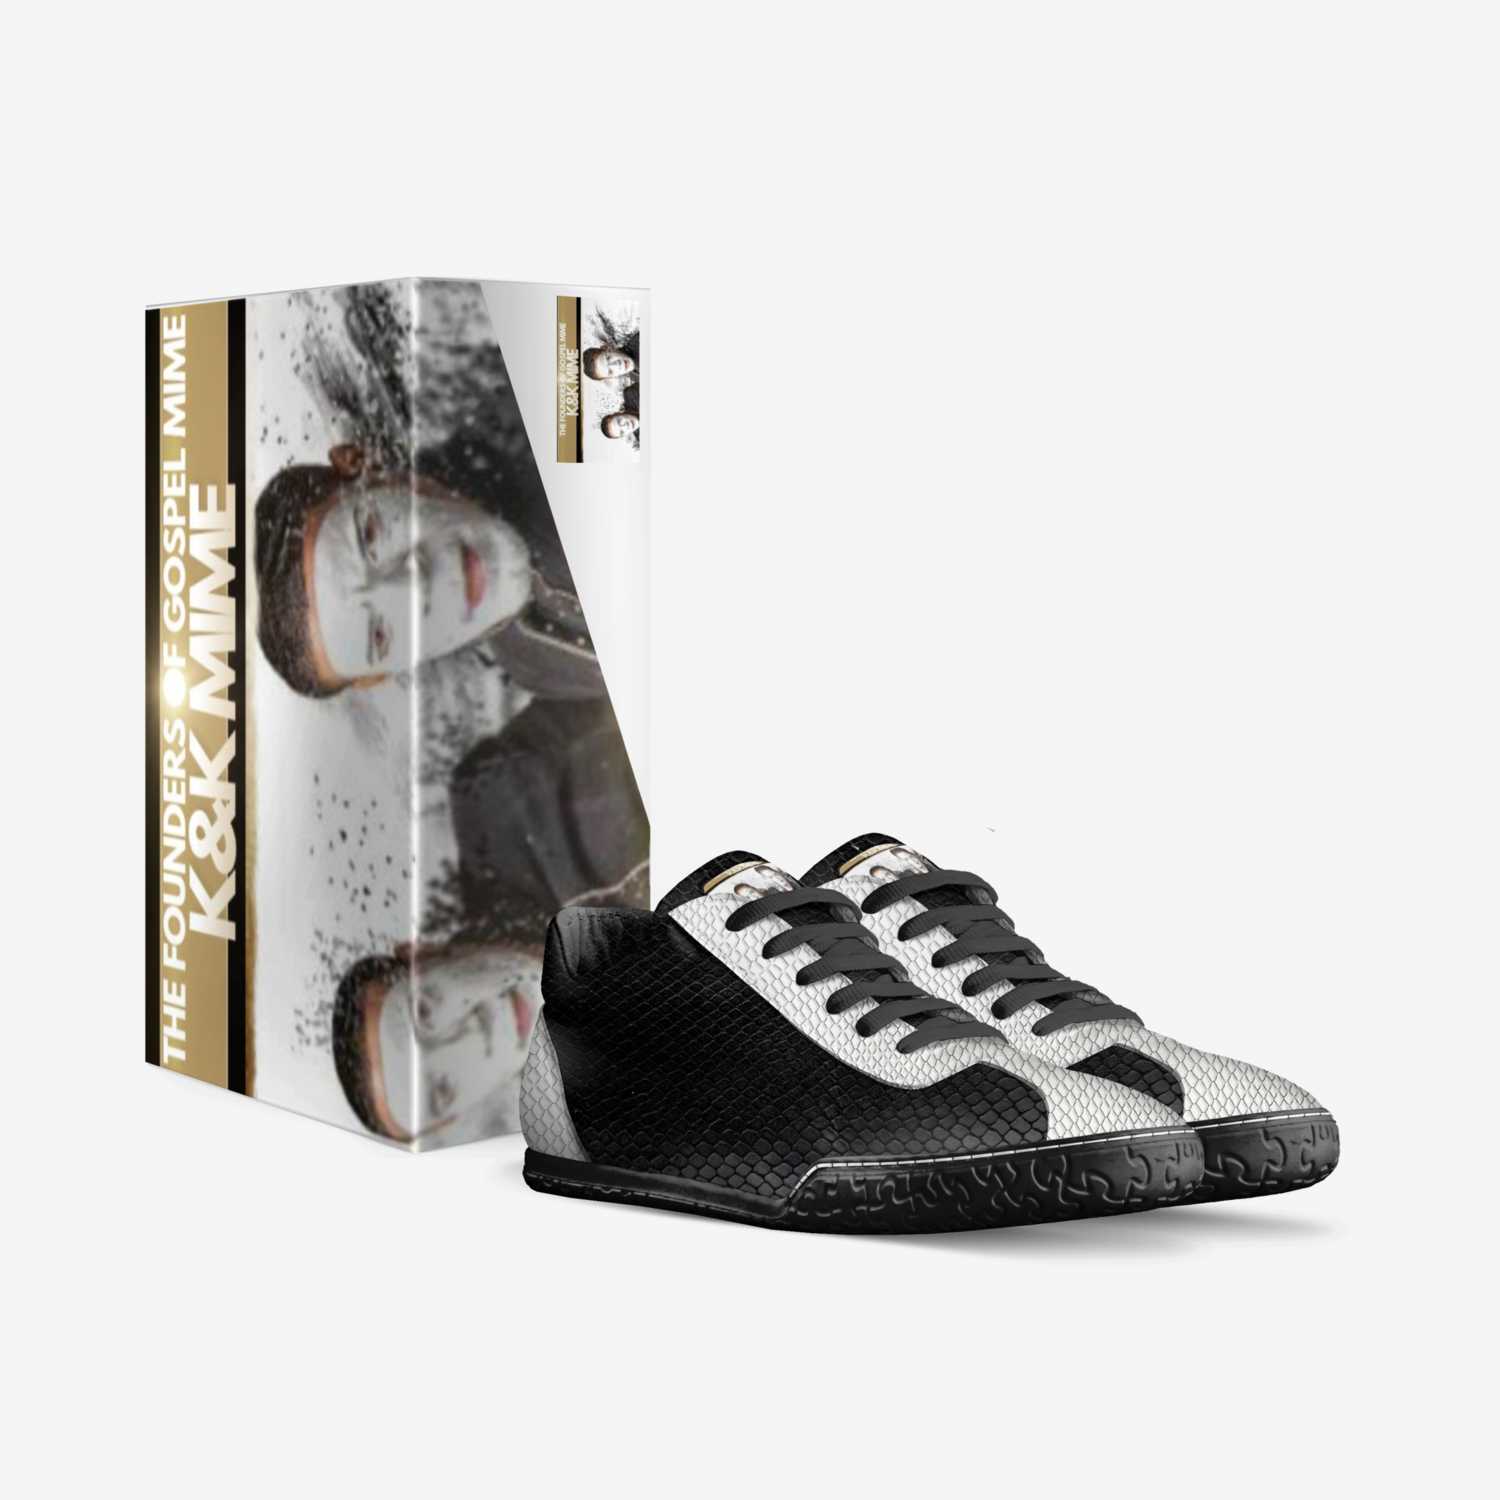 K&K Mime Design custom made in Italy shoes by Keith Edmonds | Box view